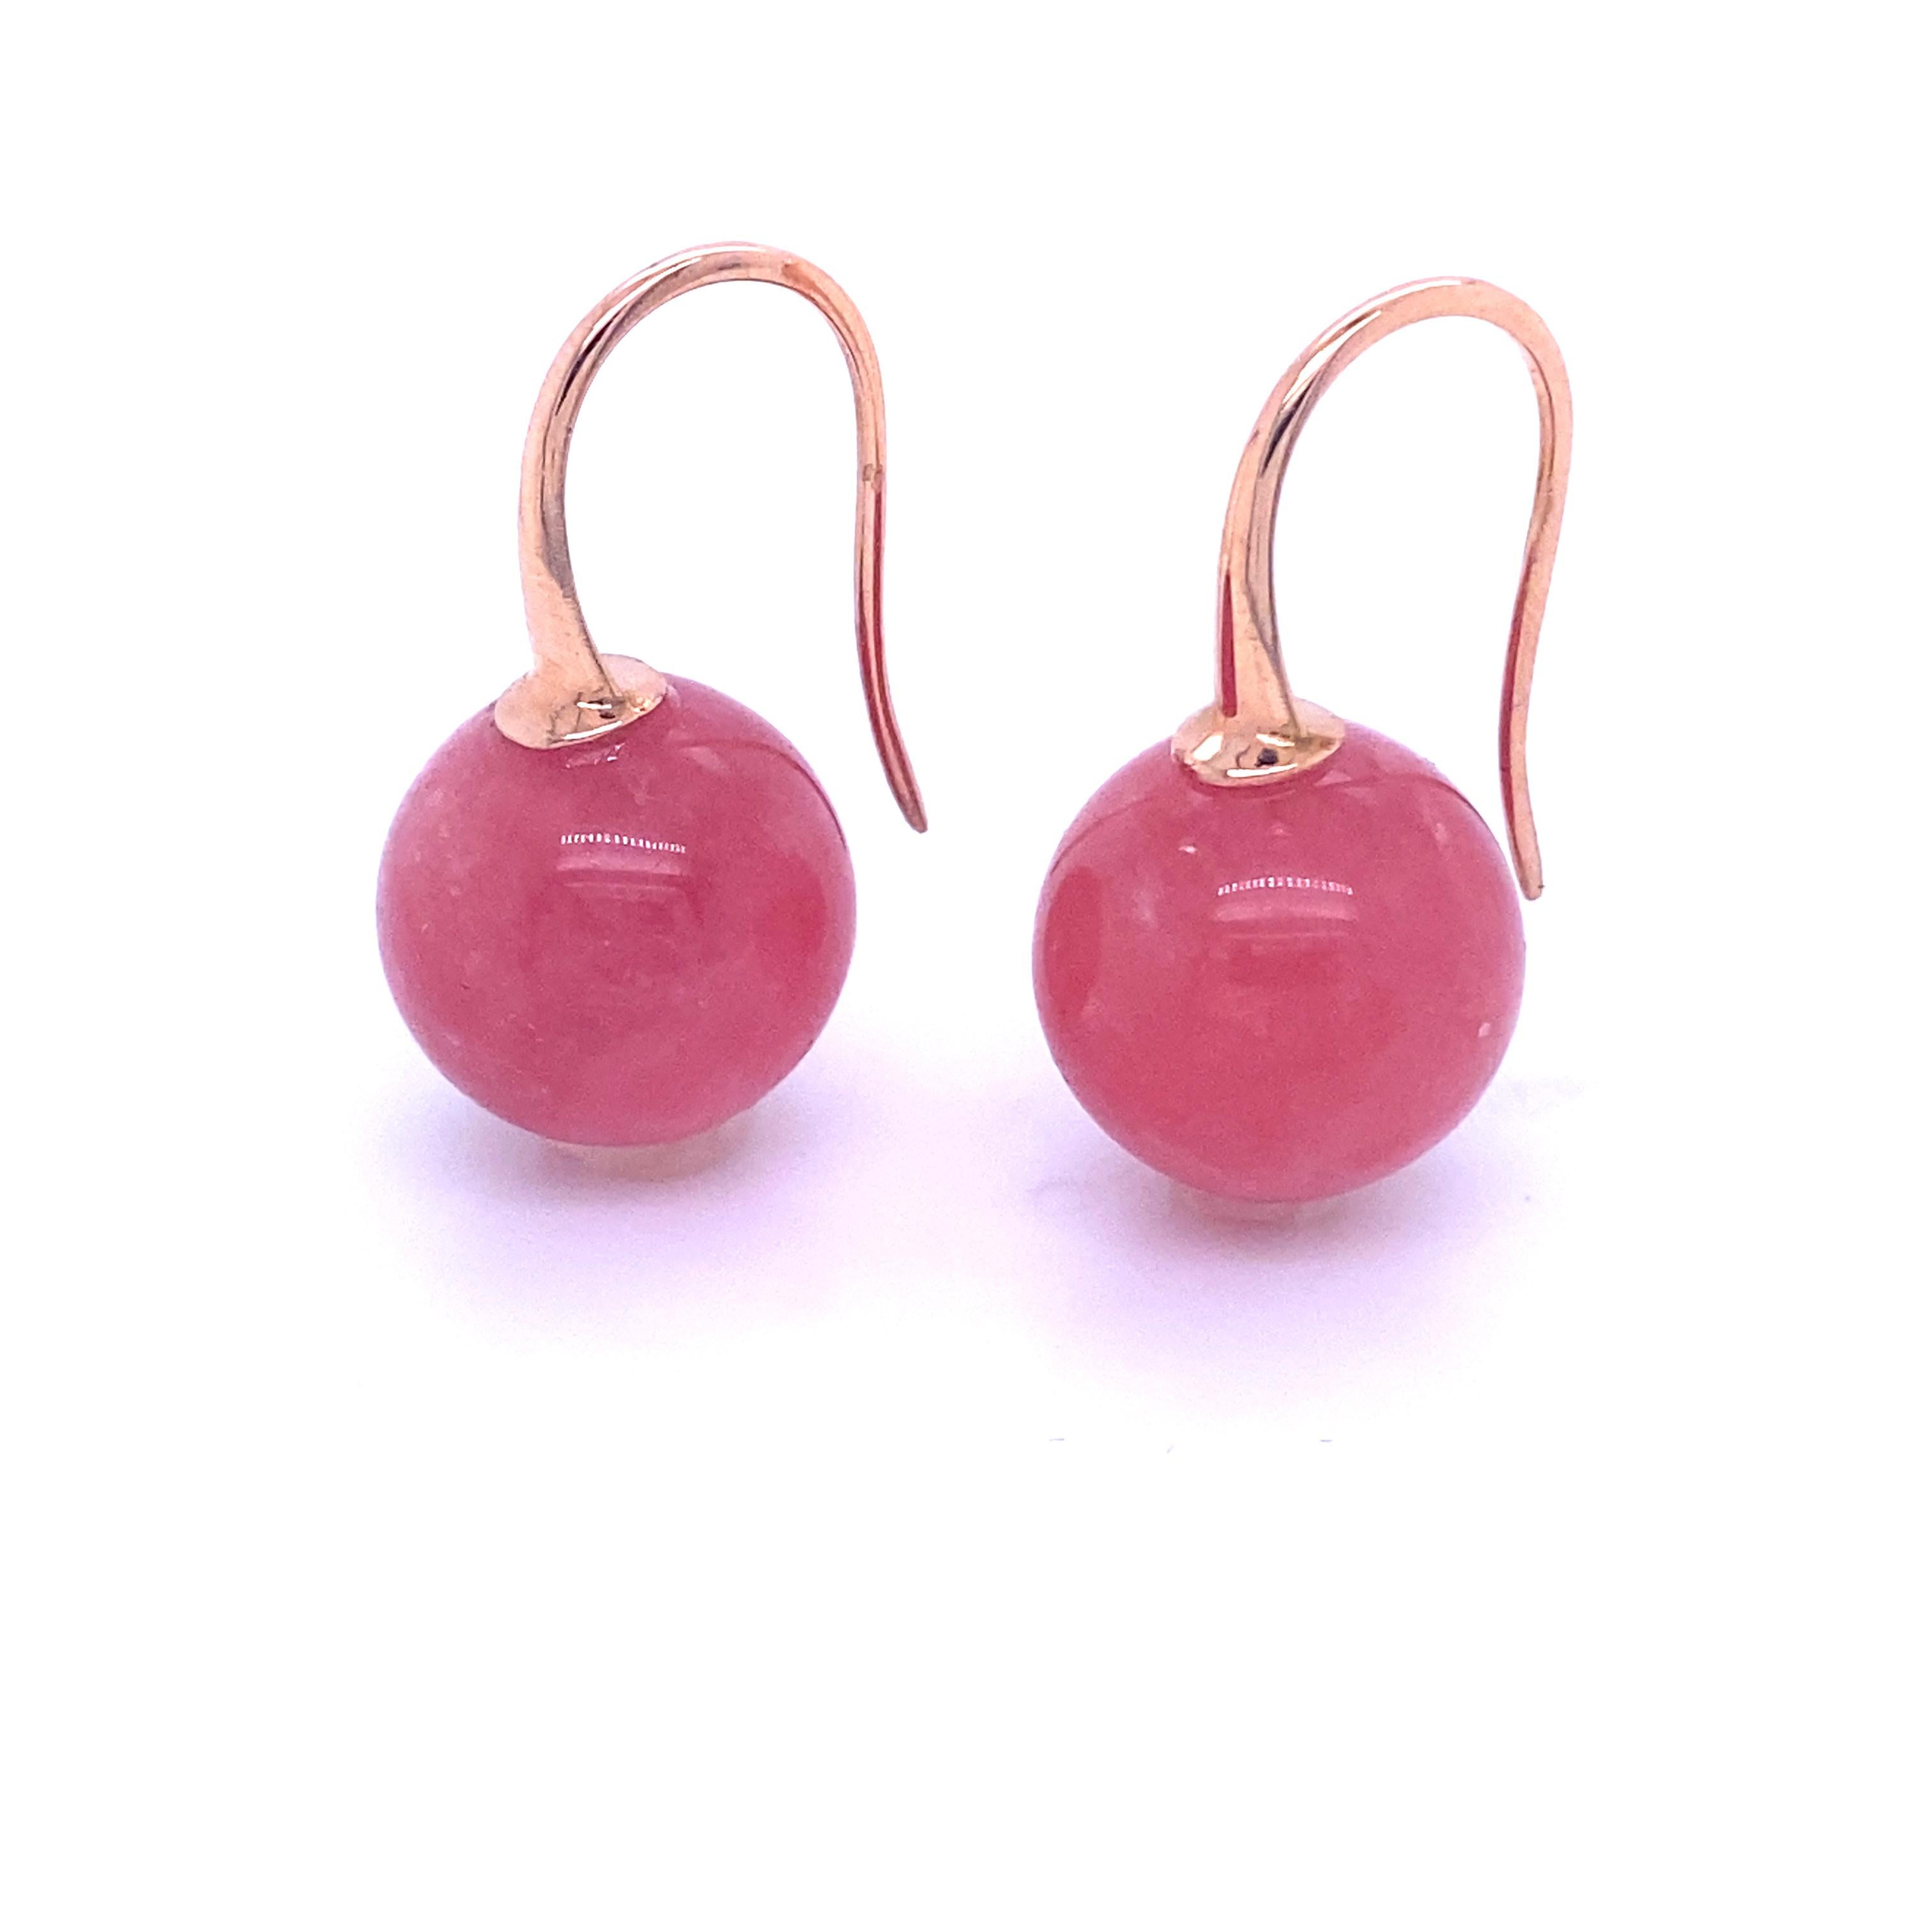 Pink Gold Earrings with Rhodocrosite 
French Collection by Mesure et Art du Temps.

Cute 18 Carat pink gold earrings accompanied by a rhodochrosite. The earring measures 2.7 cm in length and 1.8 cm in width. The weight of the earring is 12.9 grams